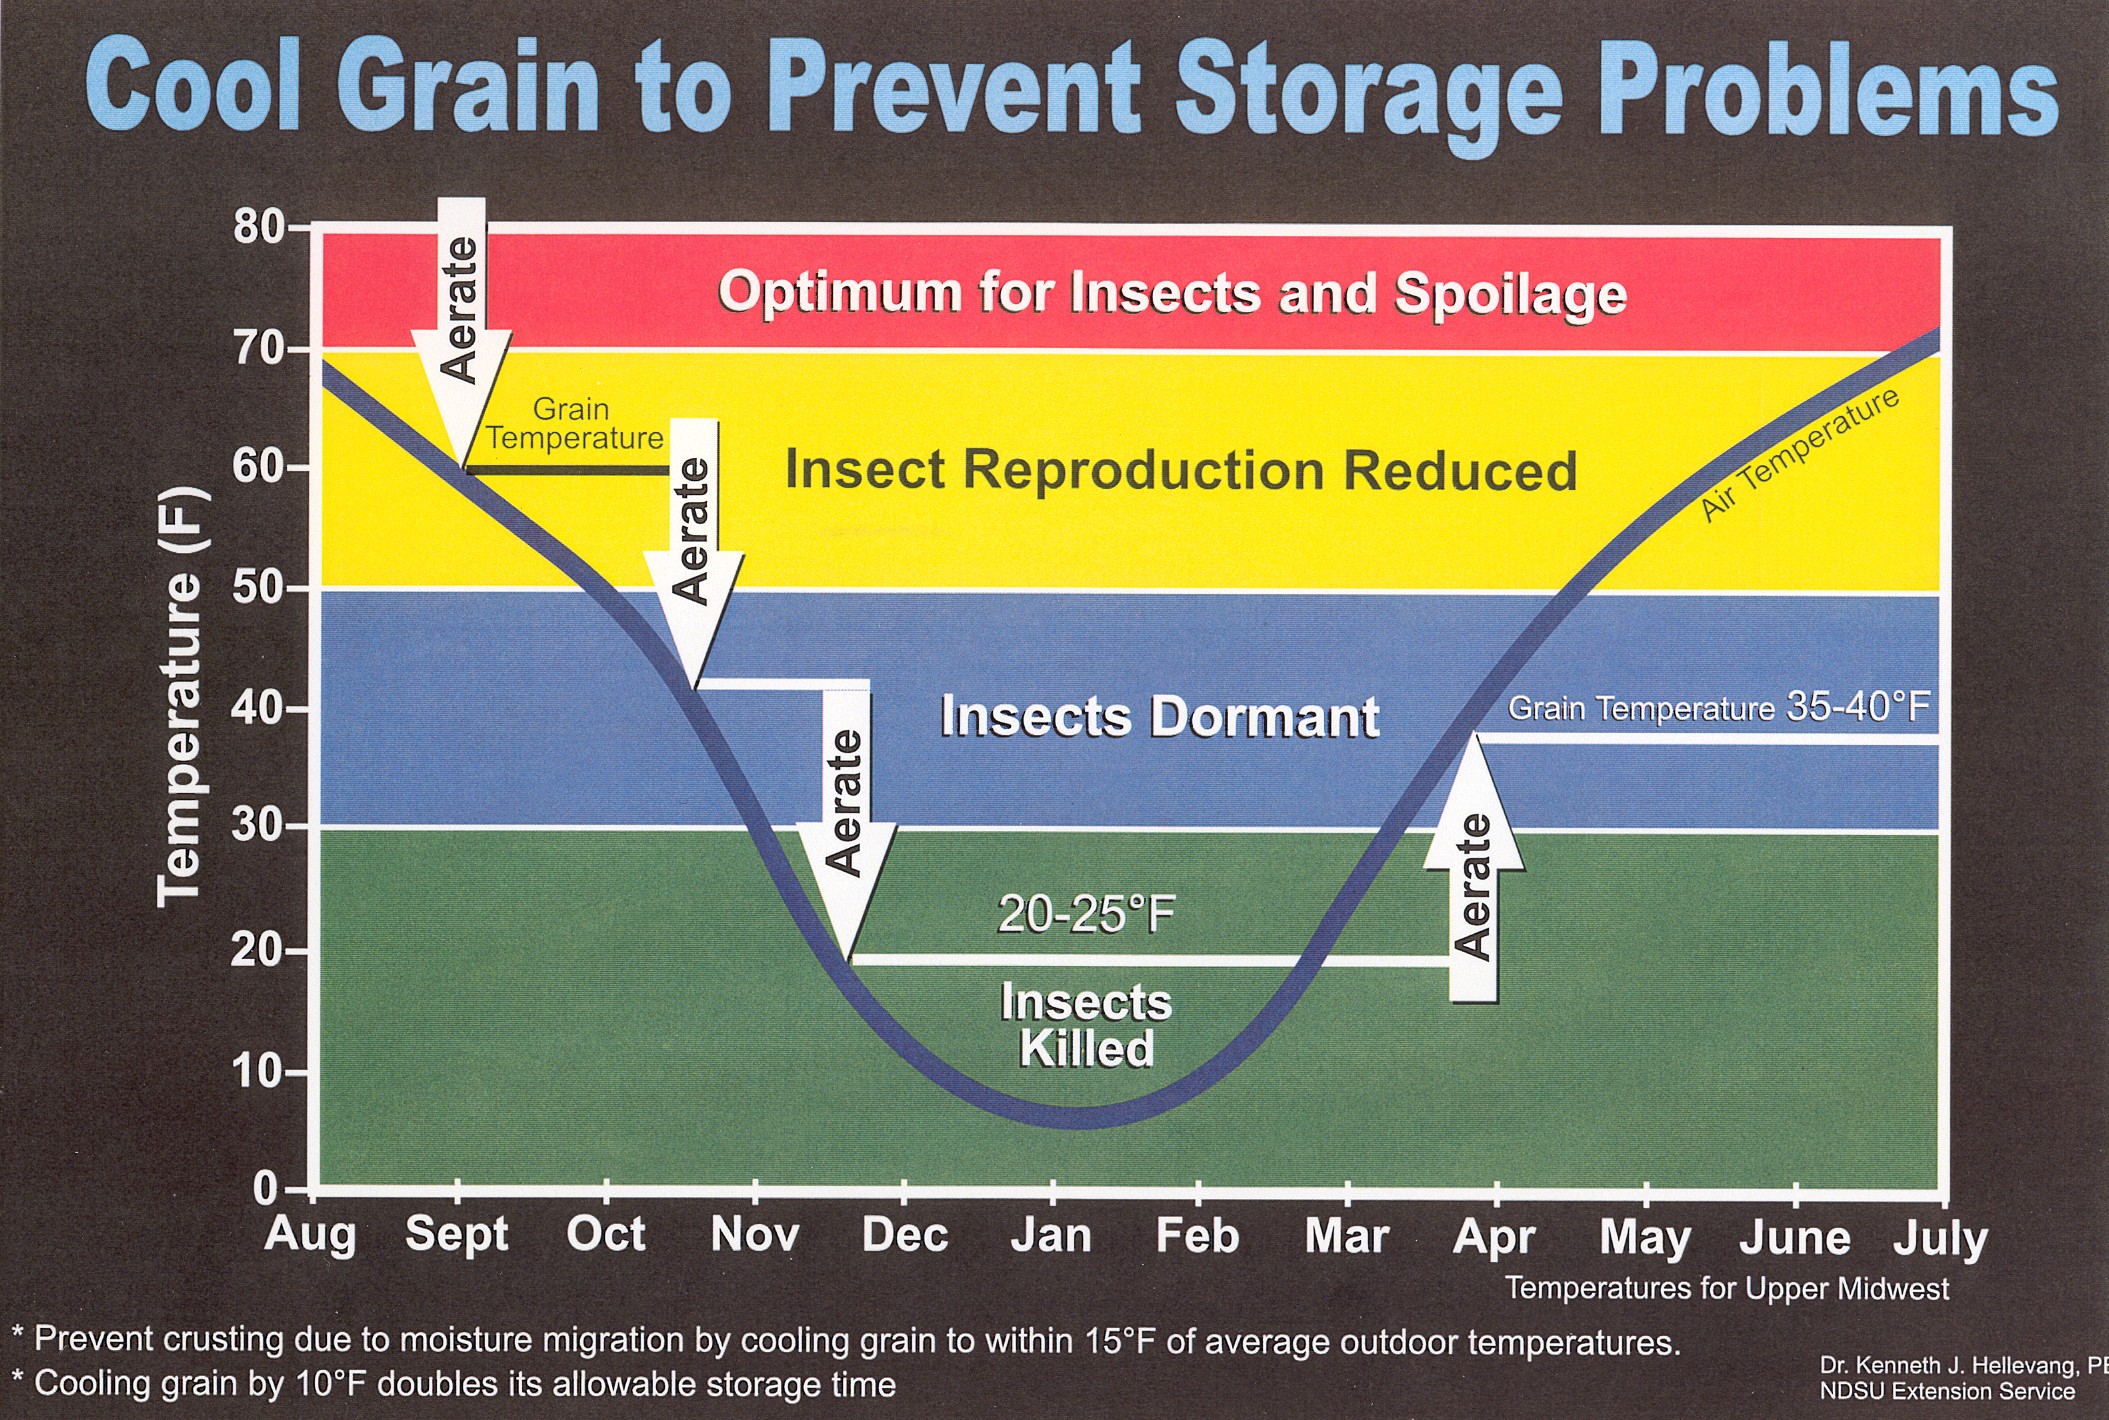 Cool Grain to Prevent Storage Problems (poster)